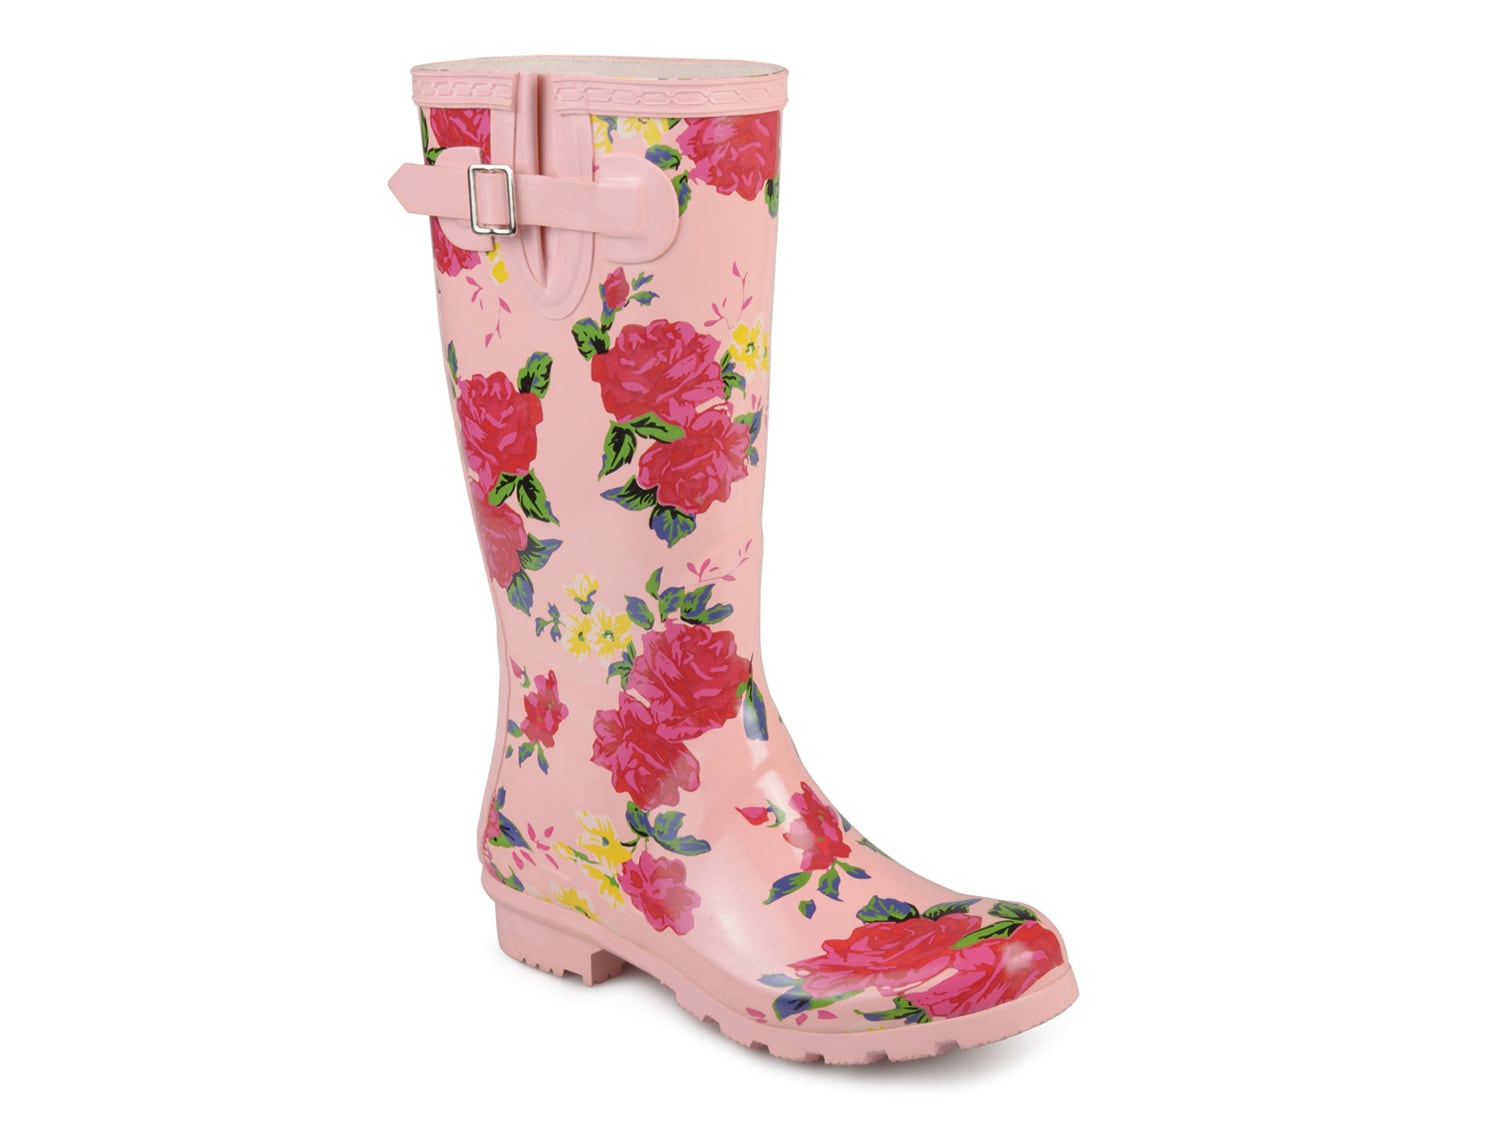 pink and black rain boots